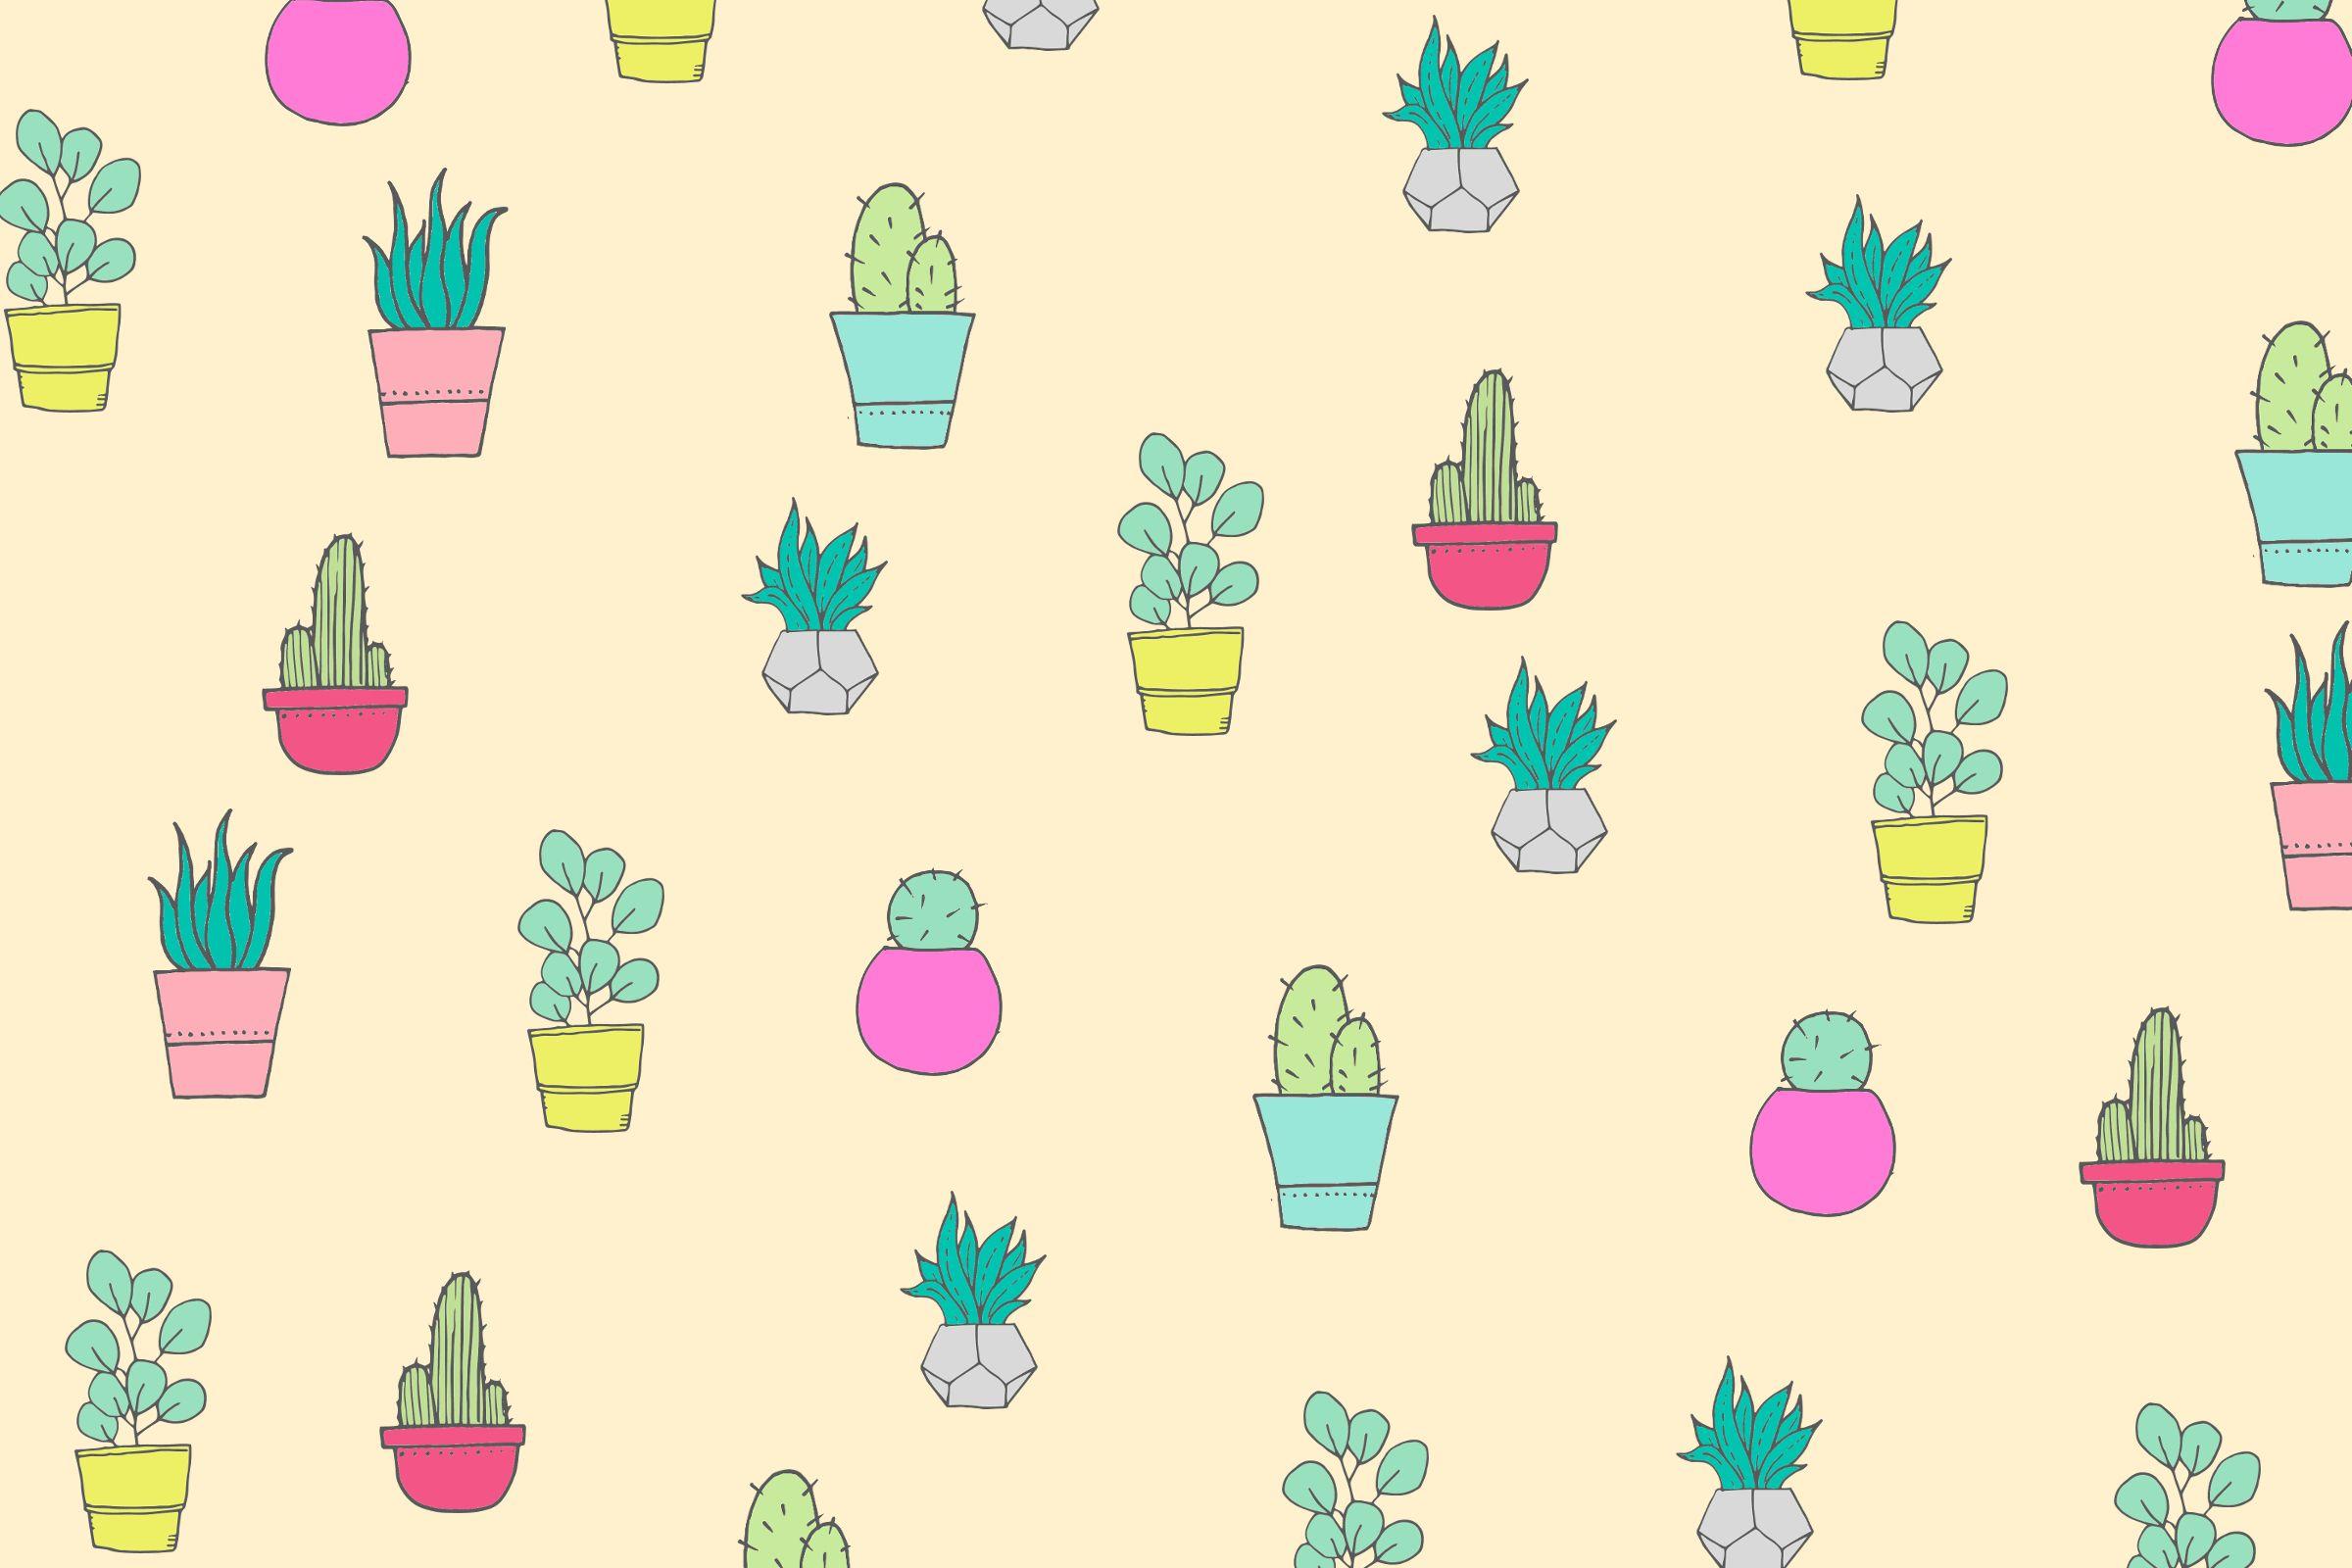 FREE CACTUS AND SUCCULENT WALLPAPERS FOR YOUR DESKTOP, TABLET AND PHONE